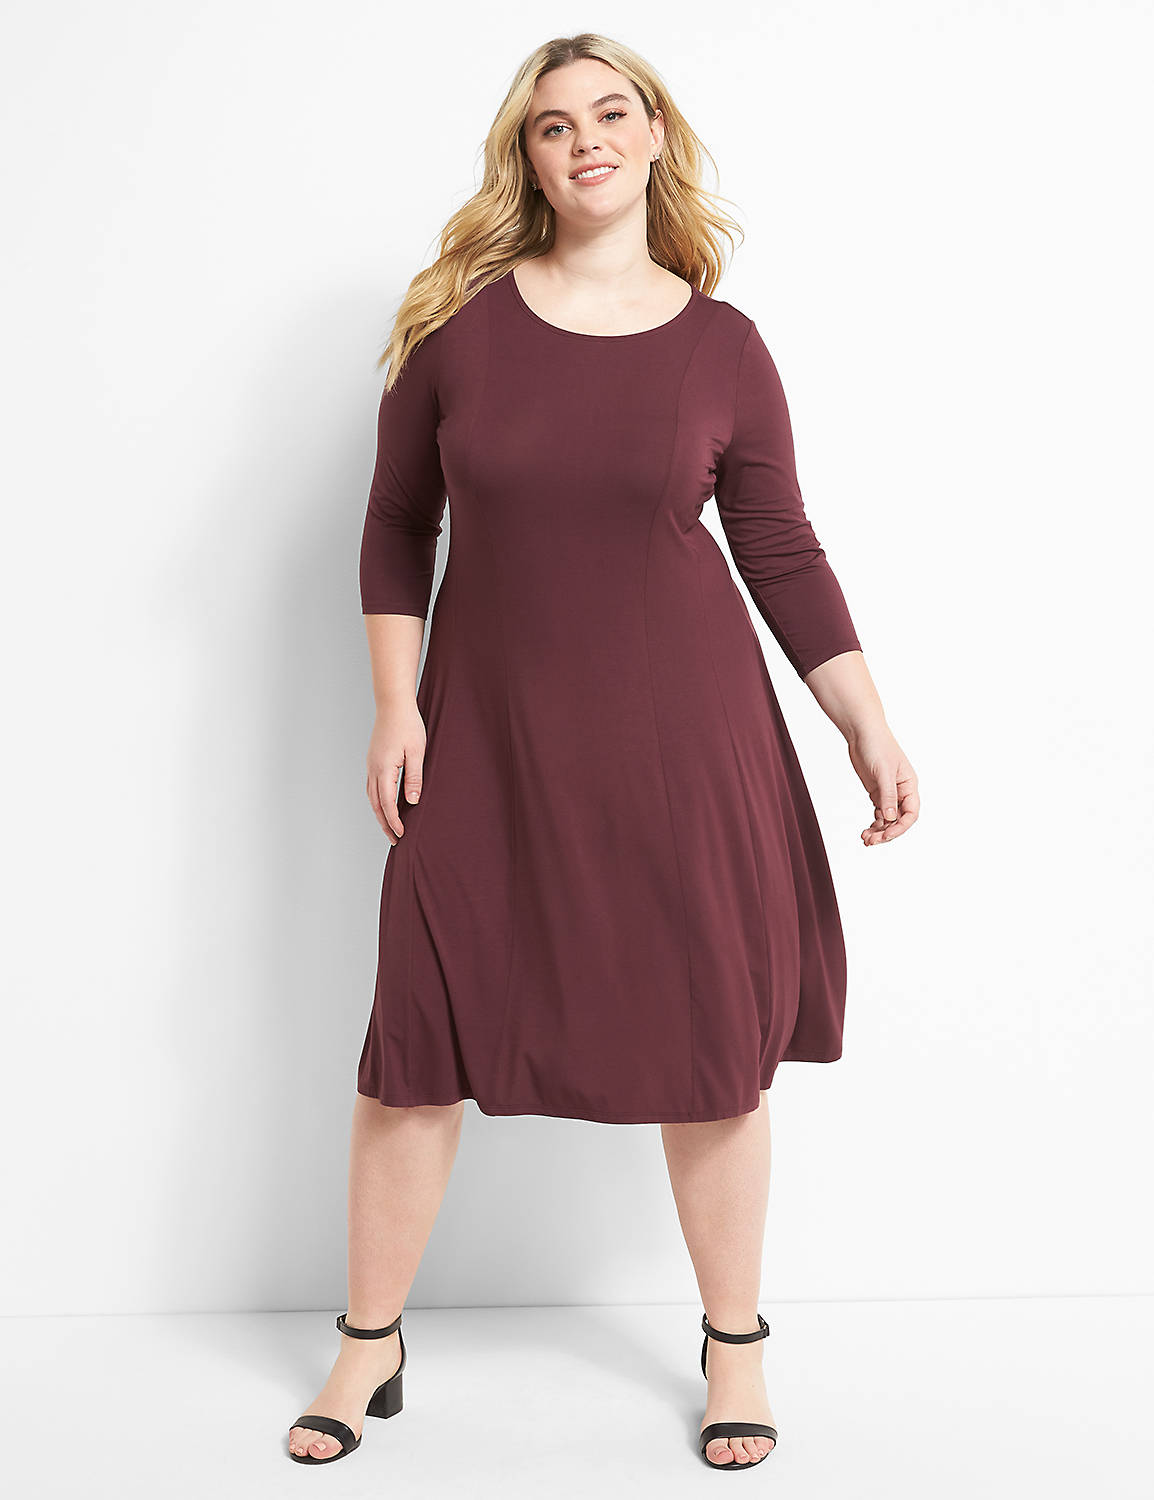 Scoop-Neck Fit & Flare Dress Product Image 1